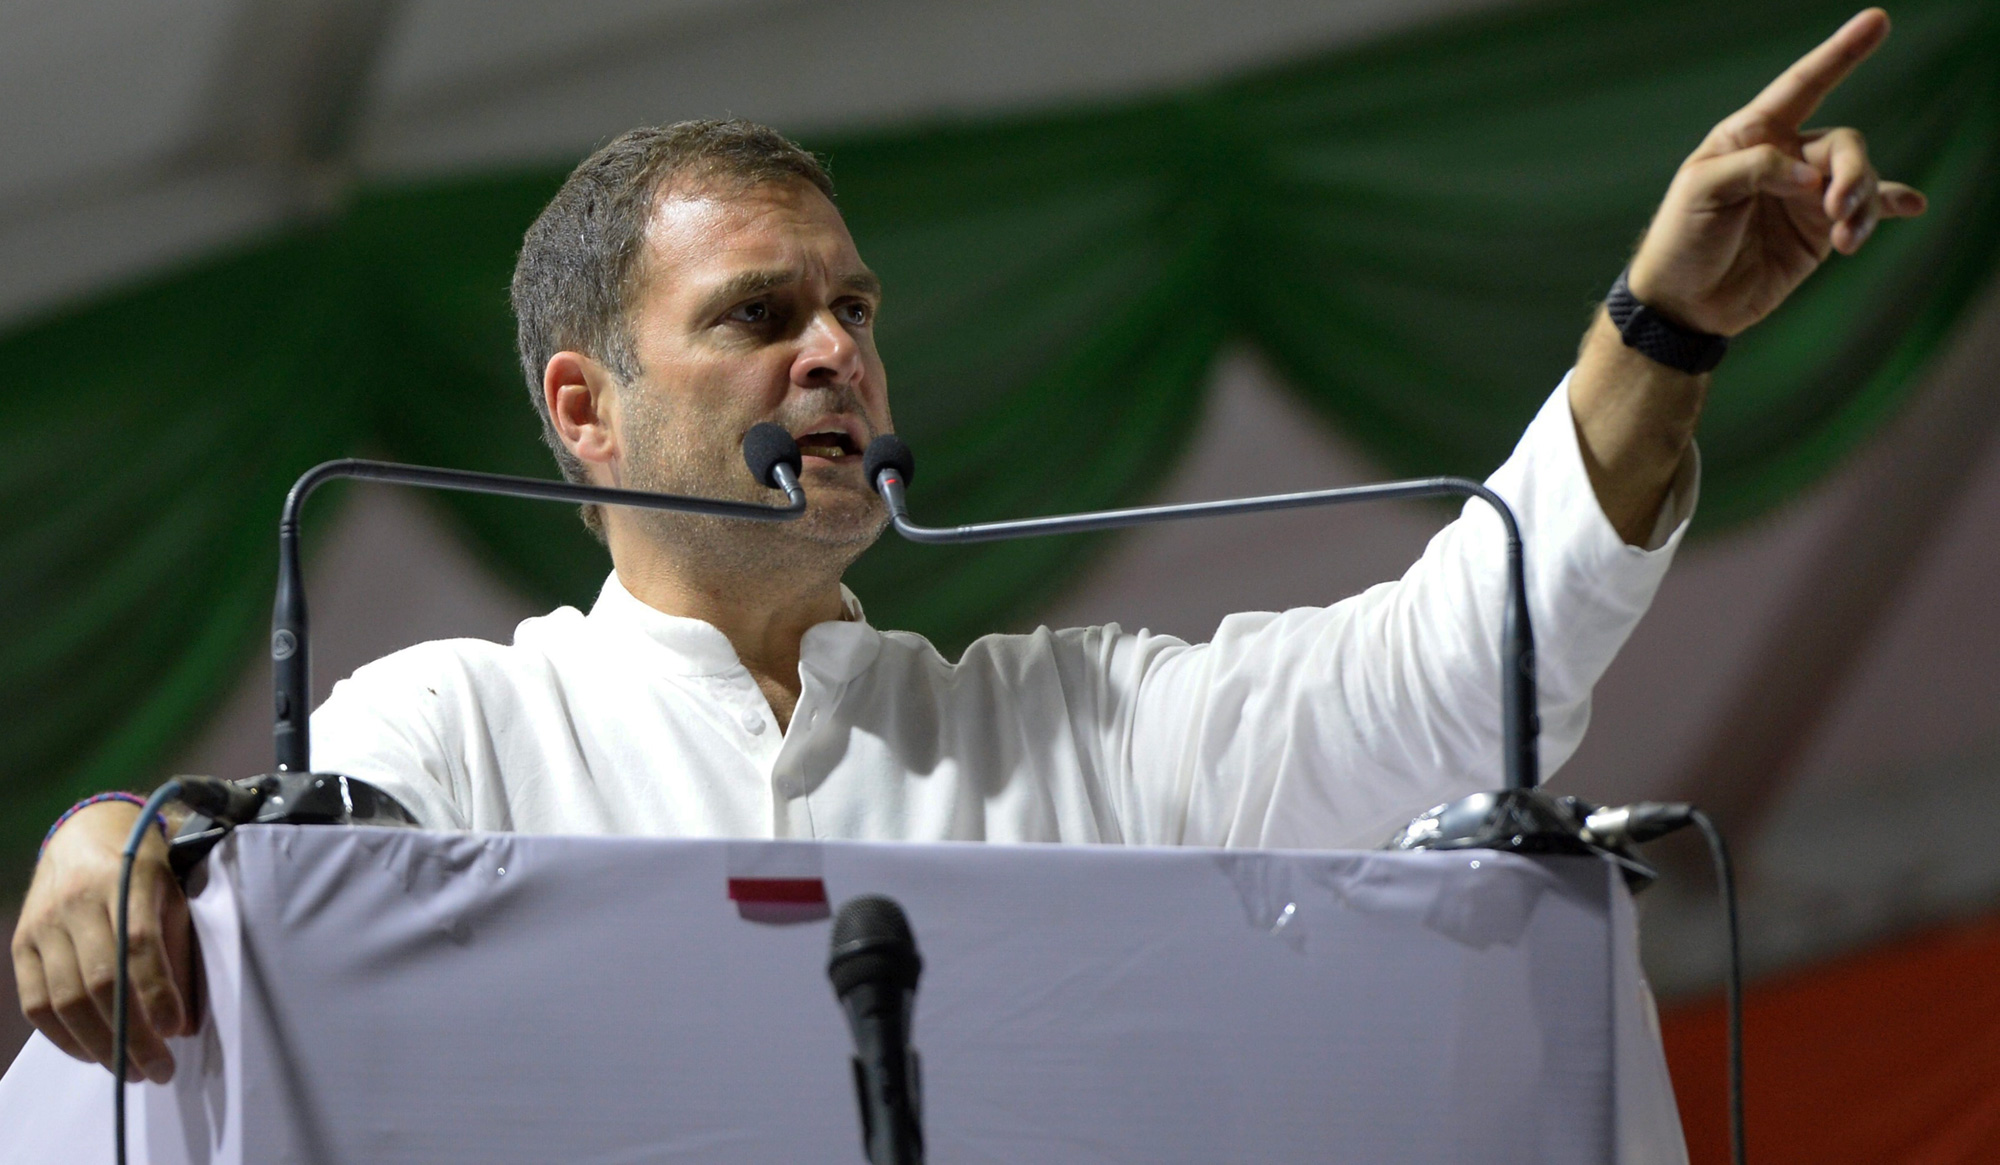 Congress president Rahul Gandhi gestures as he speaks during an election rally, ahead of the Lok Sabha polls in Bangalore Rural district on Sunday, March 31, 2019. 